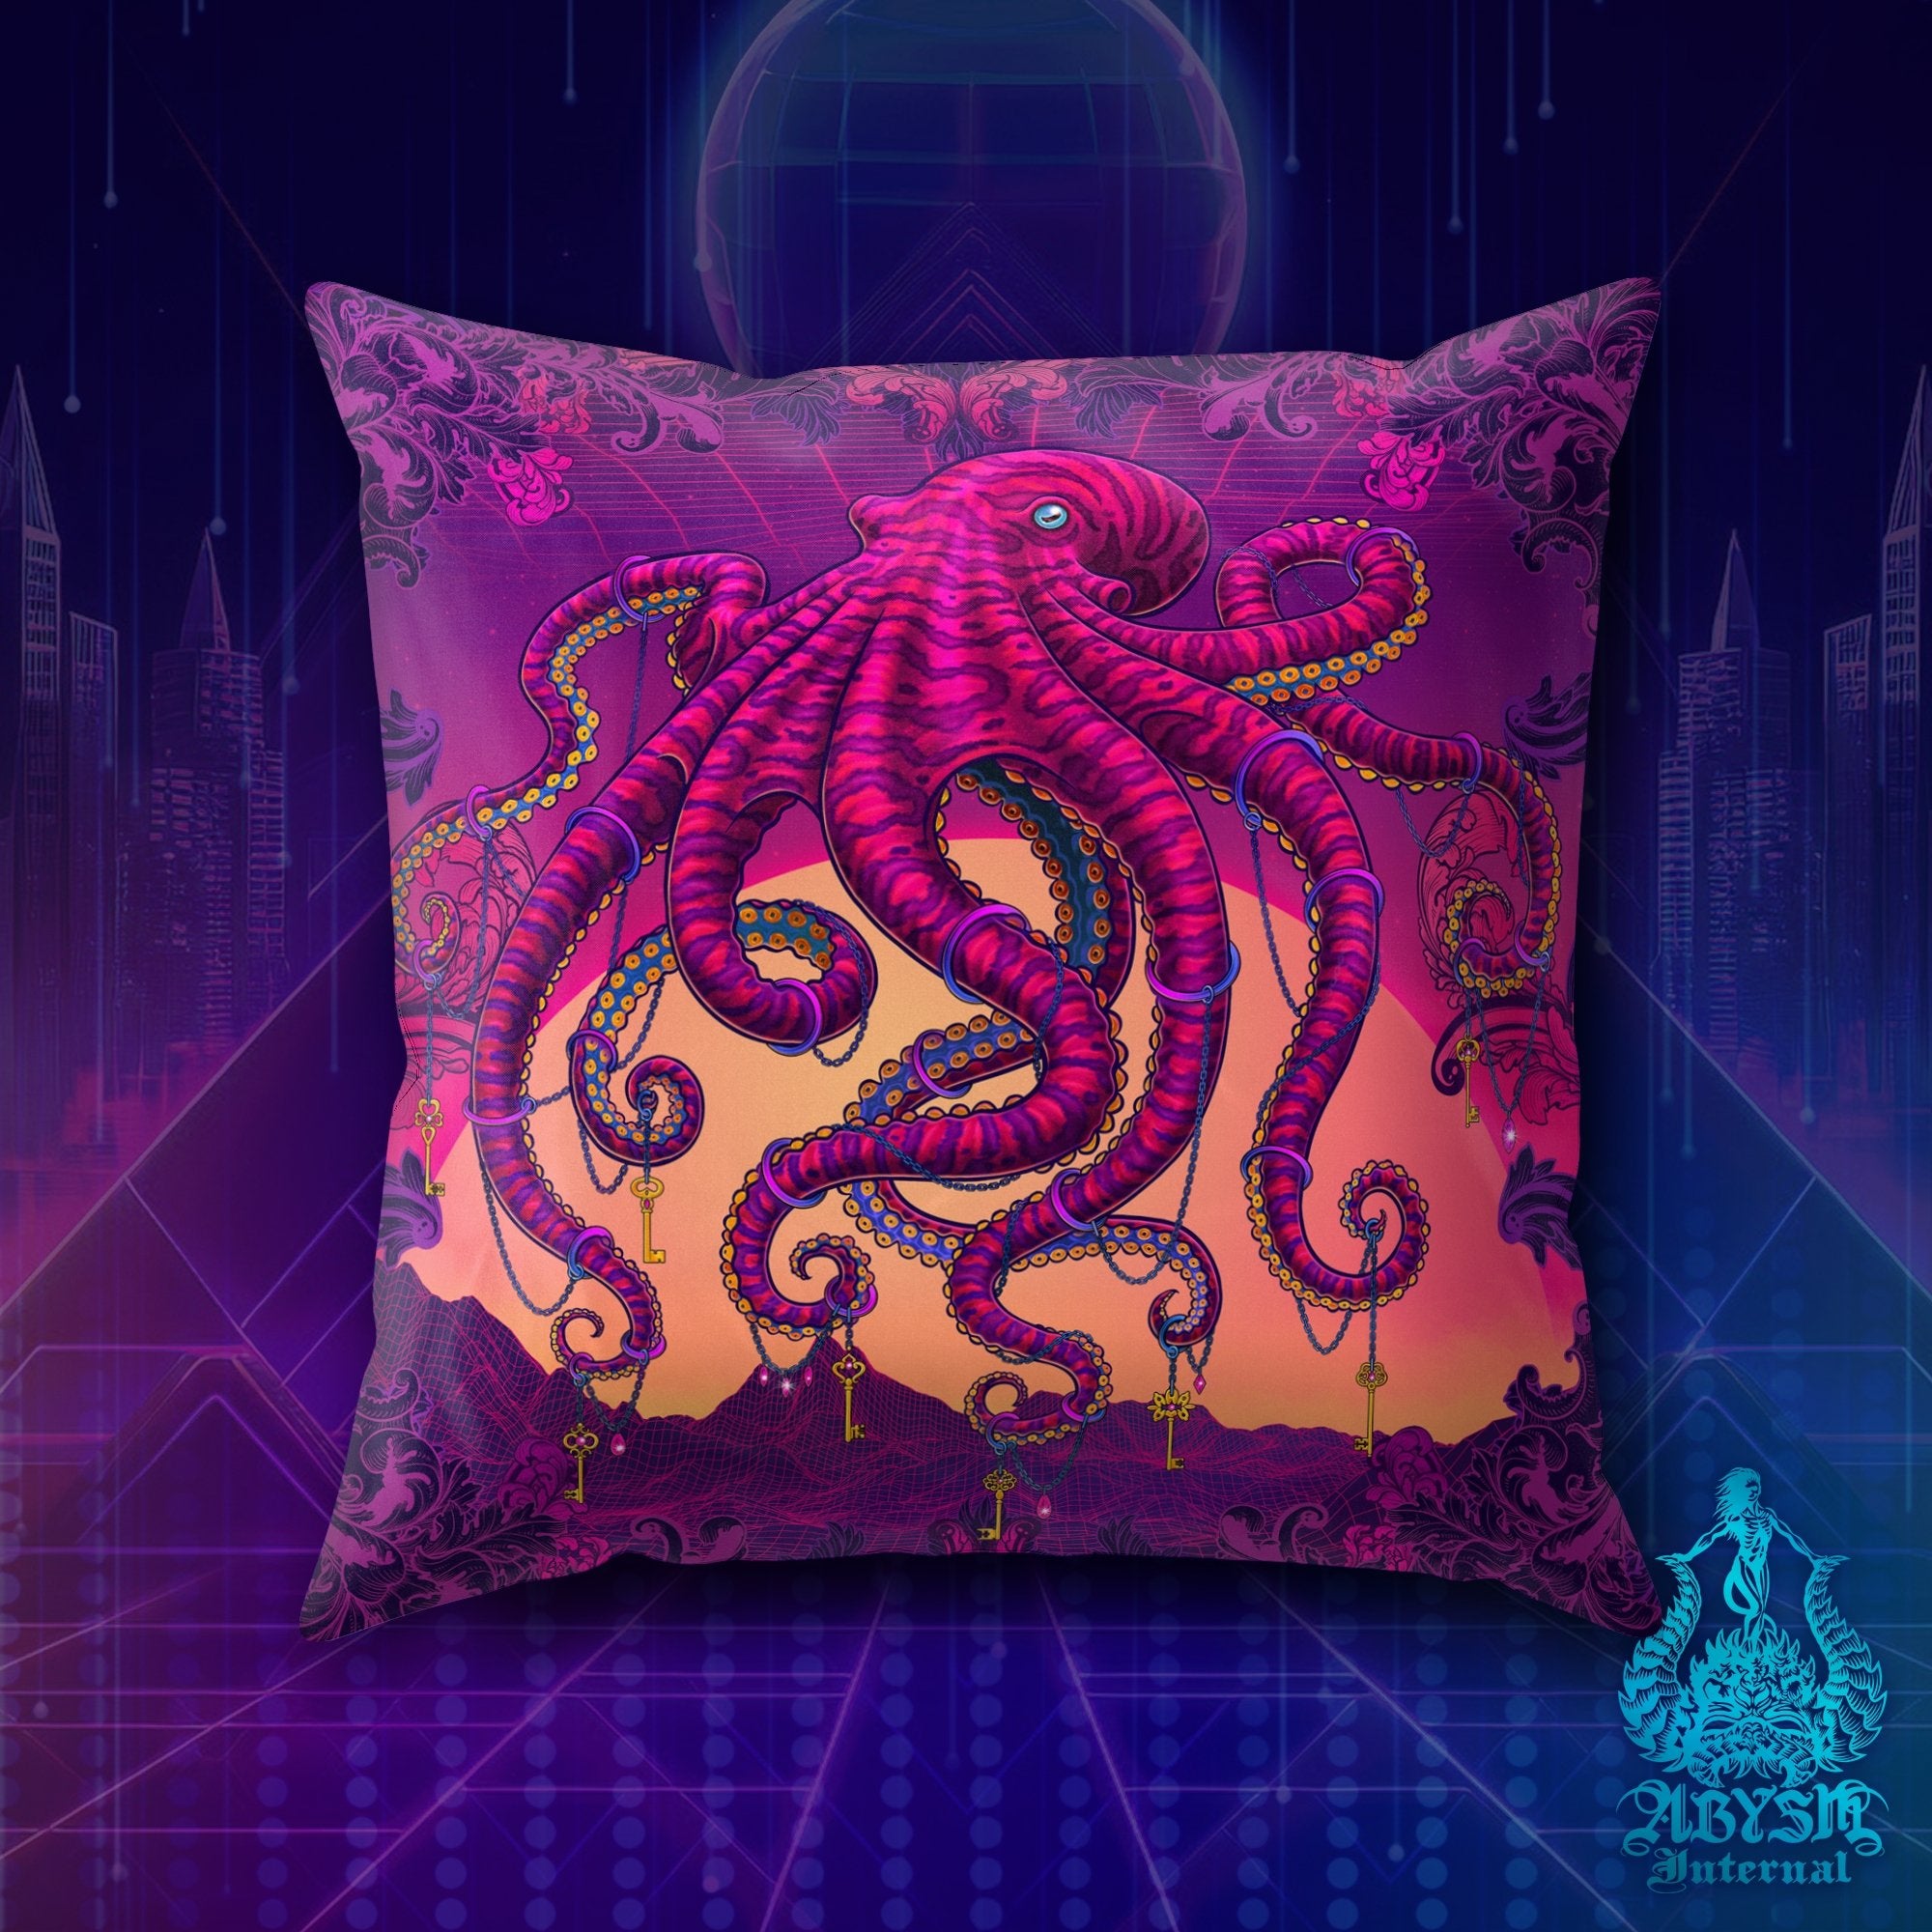 Vaporwave Throw Pillow, Synthwave Decorative Accent Cushion, Retrowave 80s Room Decor, Psychedelic Art Print - Octopus - Abysm Internal